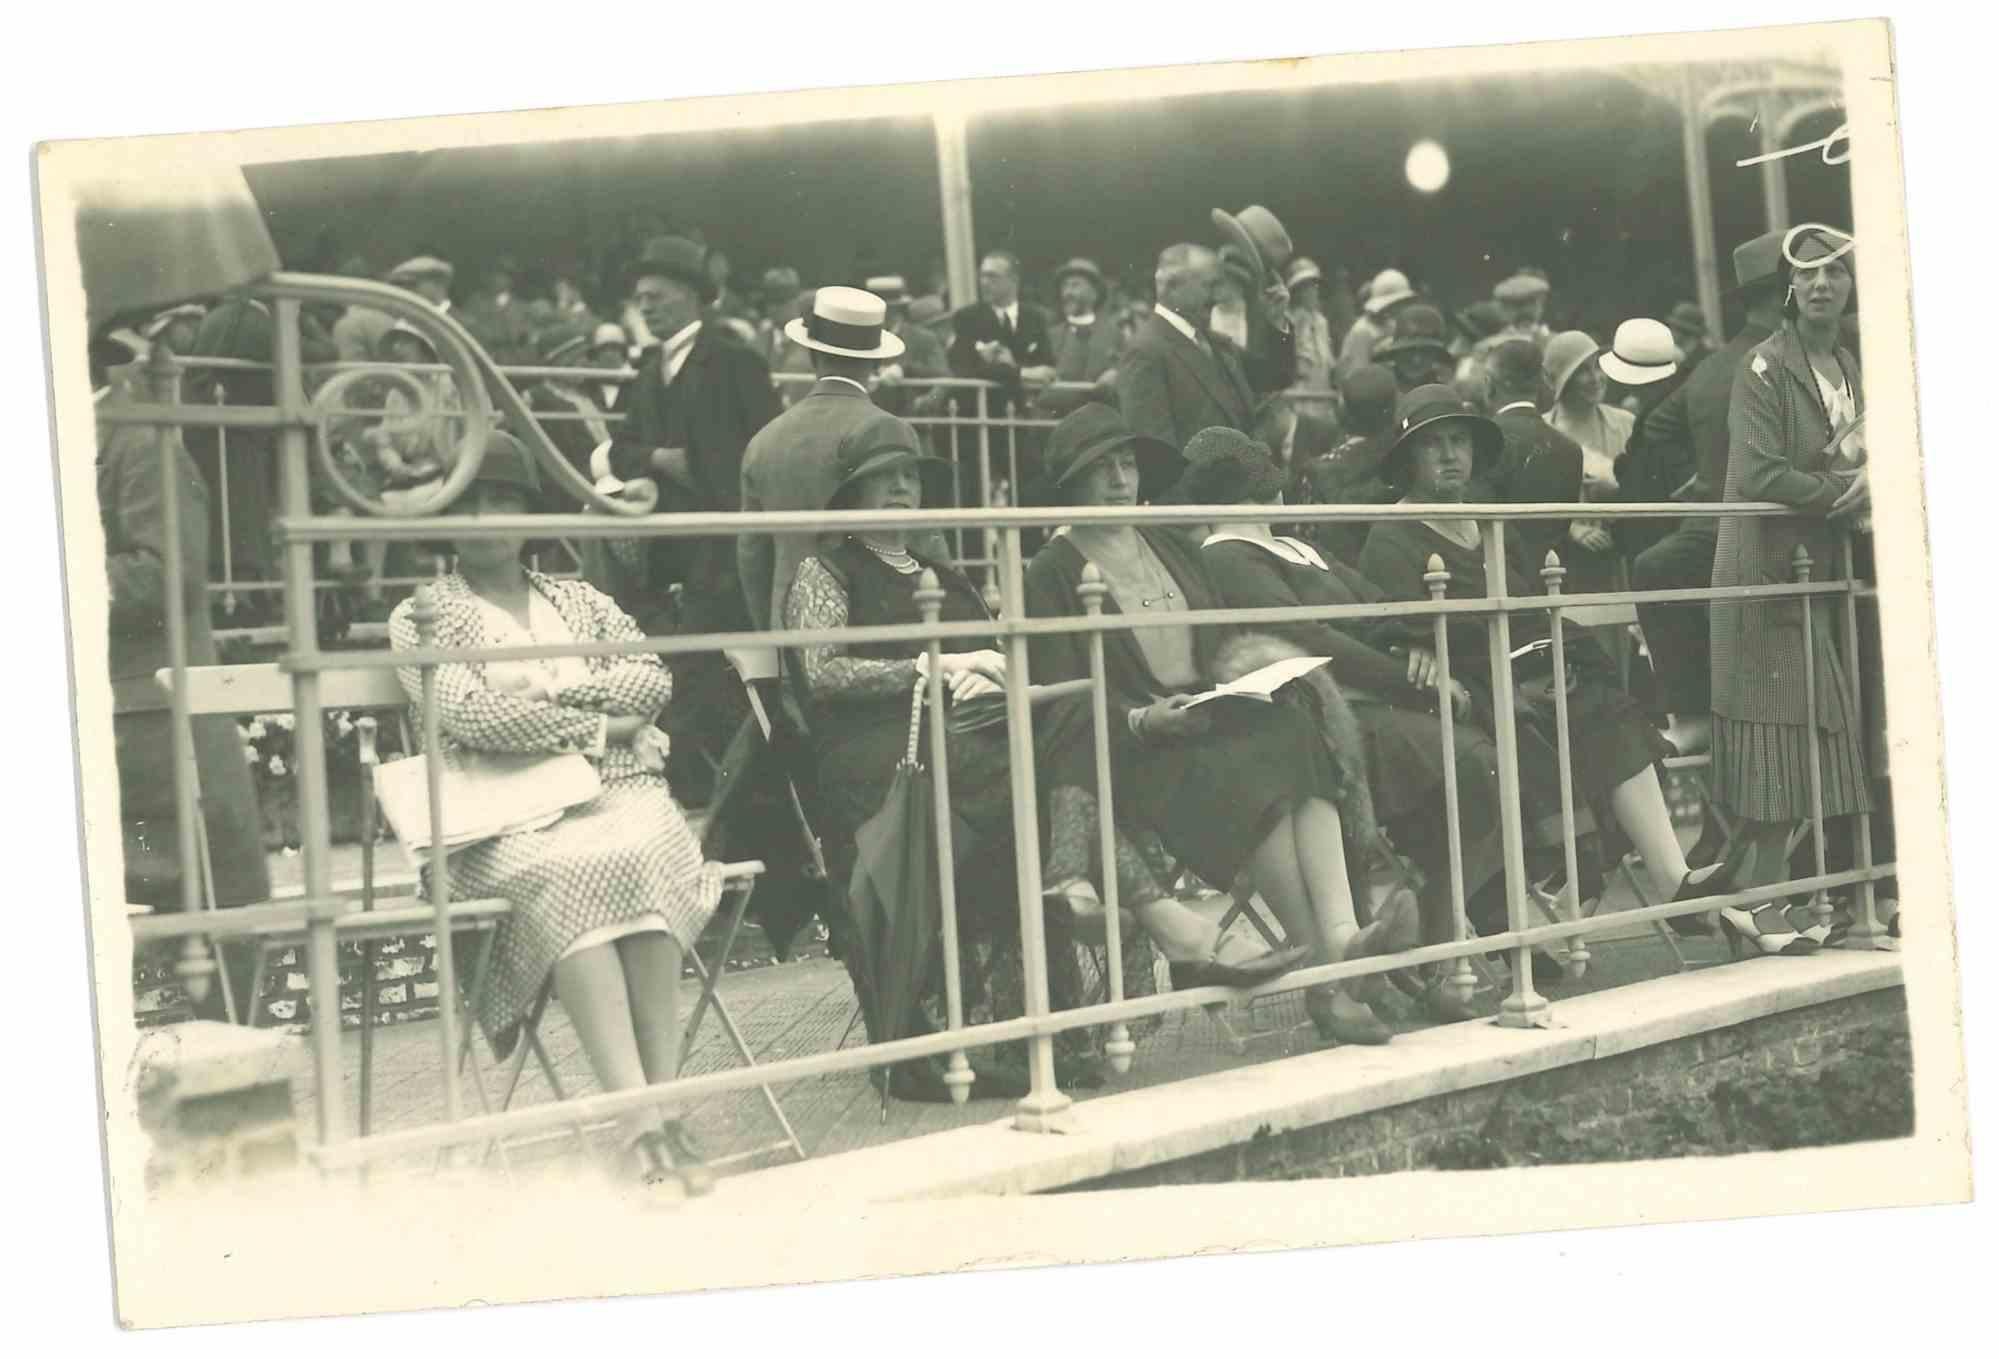 At the Horse Race  - The Old Days - Early 20th Century